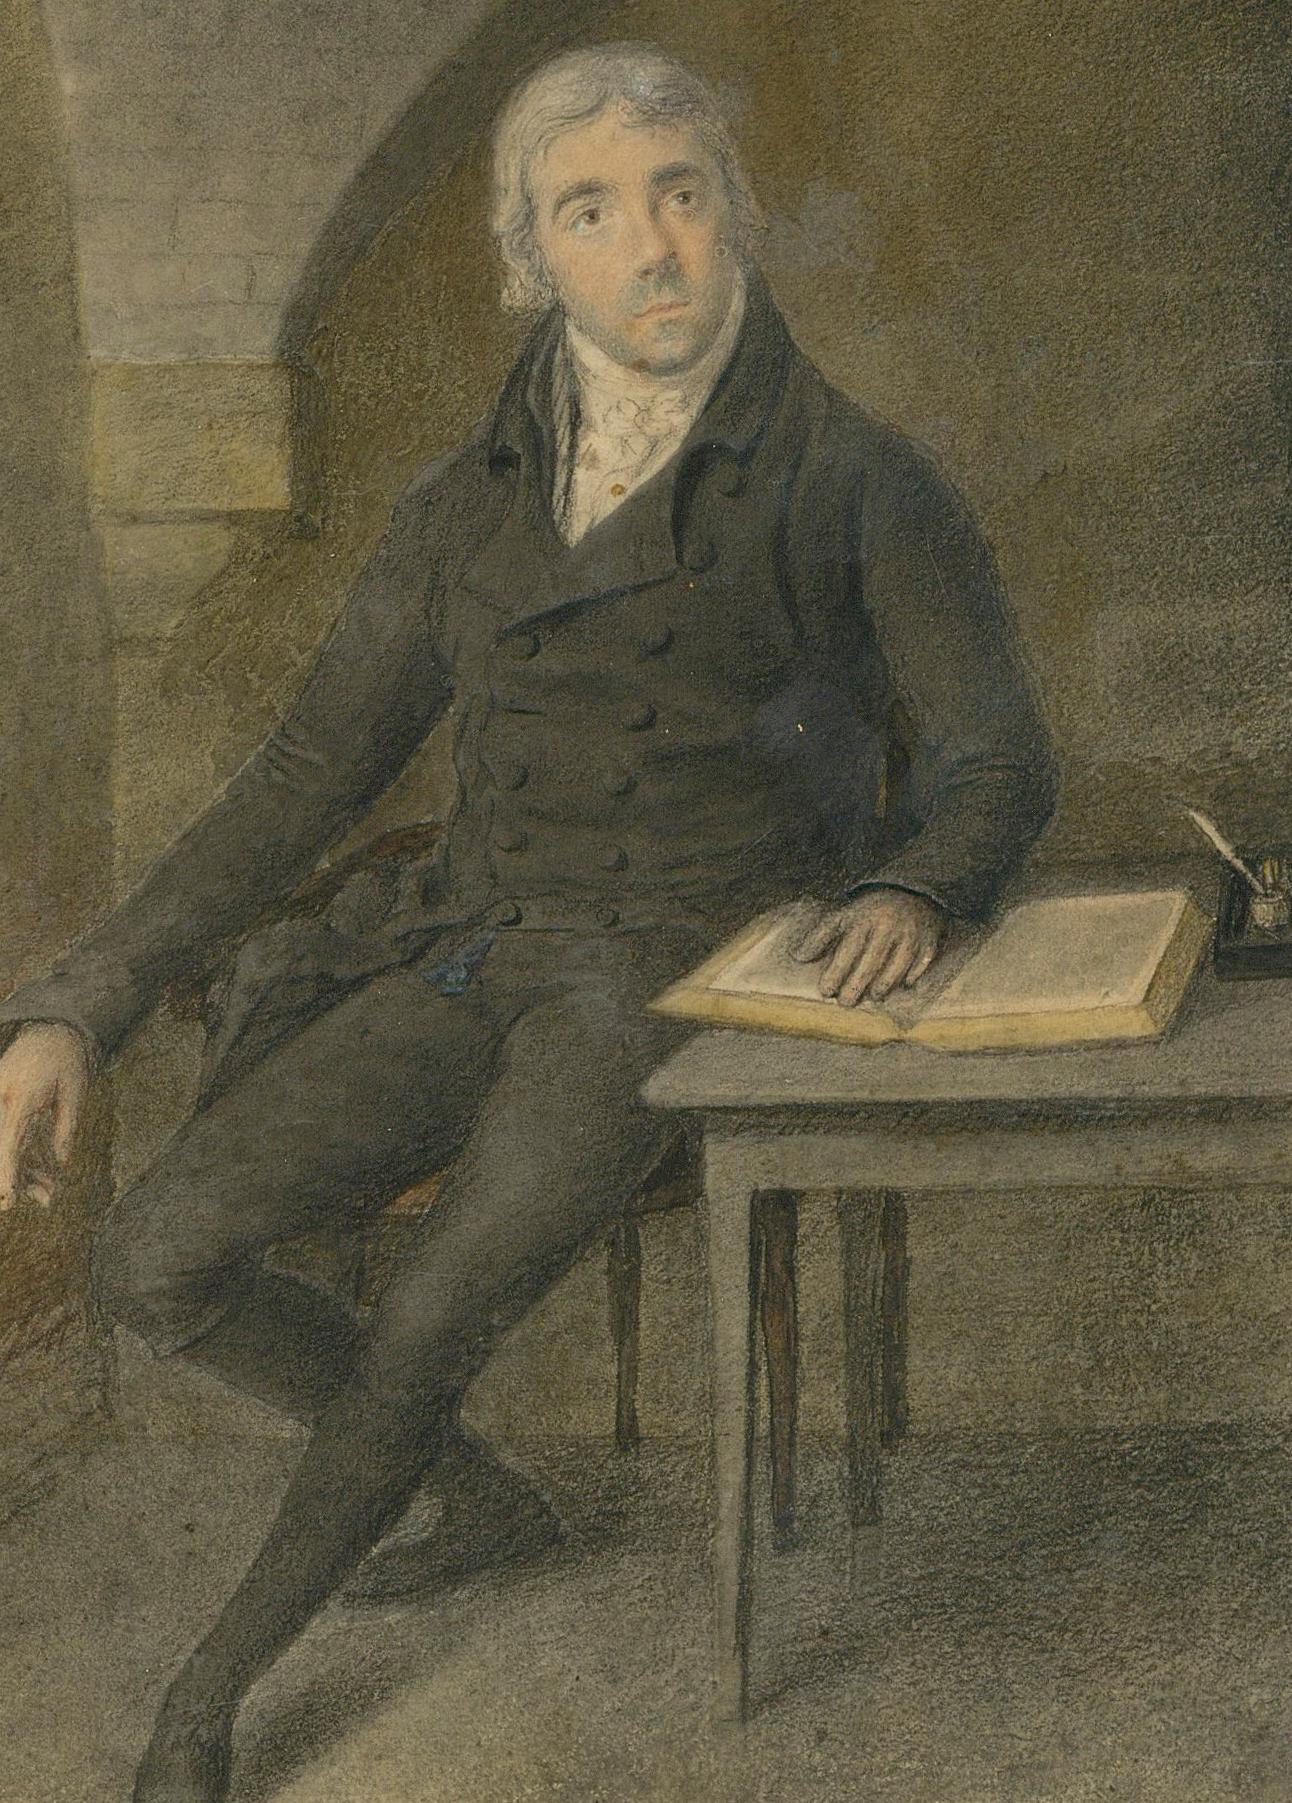 A detailed graphite and watercolour portrait of a 19th century gentleman, seated at a writing desk with an open book and inkwell. The gentleman can be seen wearing a black tailored suit, with double buttoned jacket and white neckerchief.